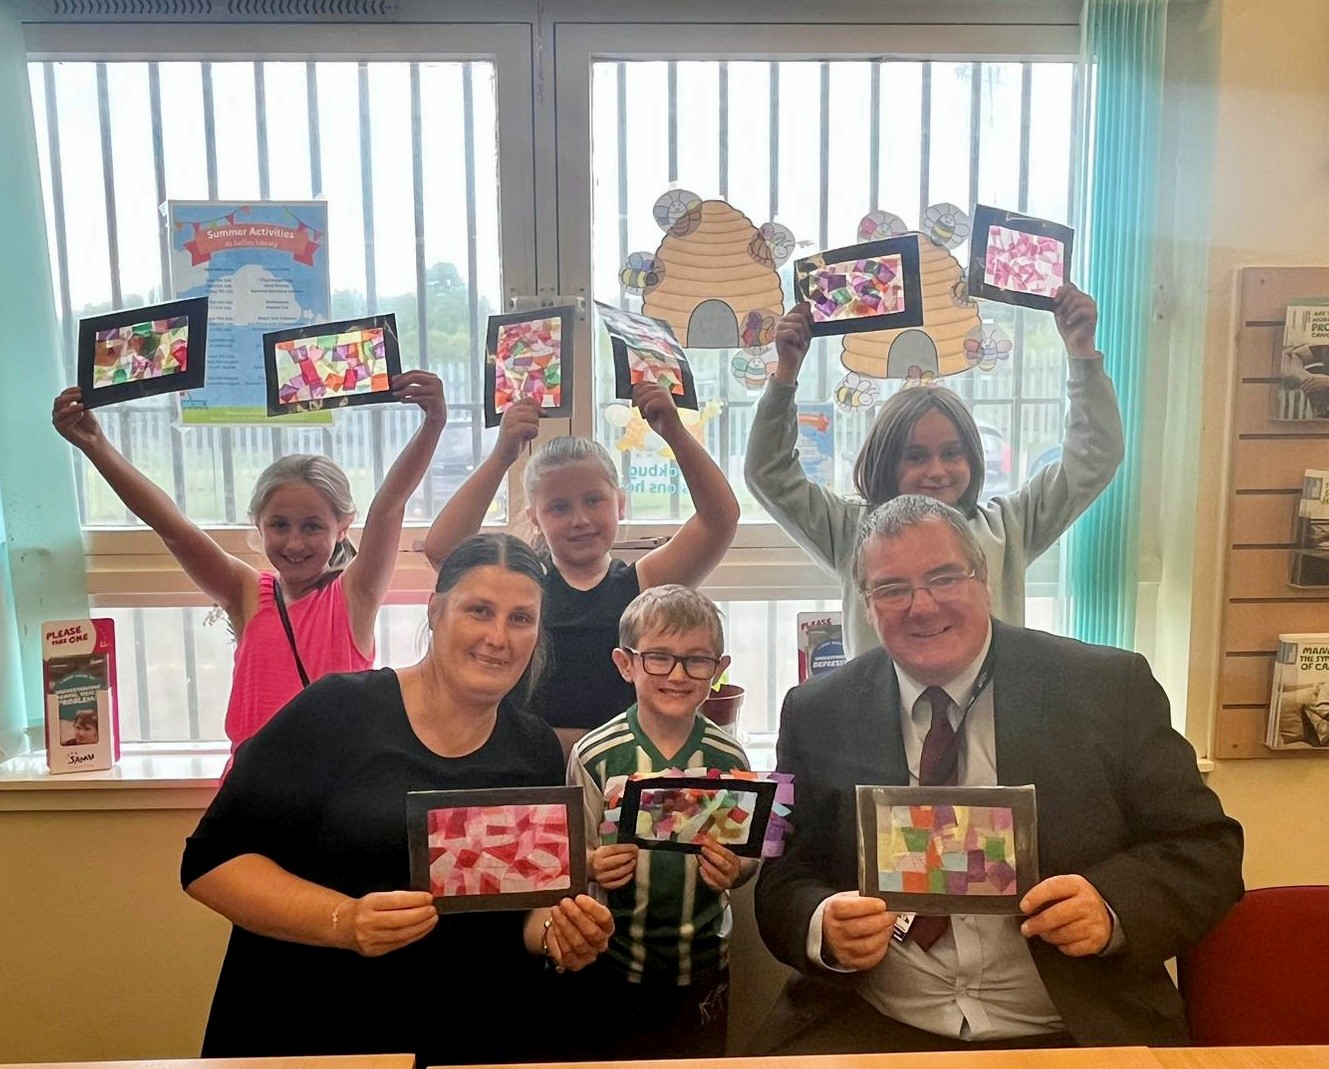 Cllr McGinty and Cllr Lennie with children, holding the stained glass window art they created.